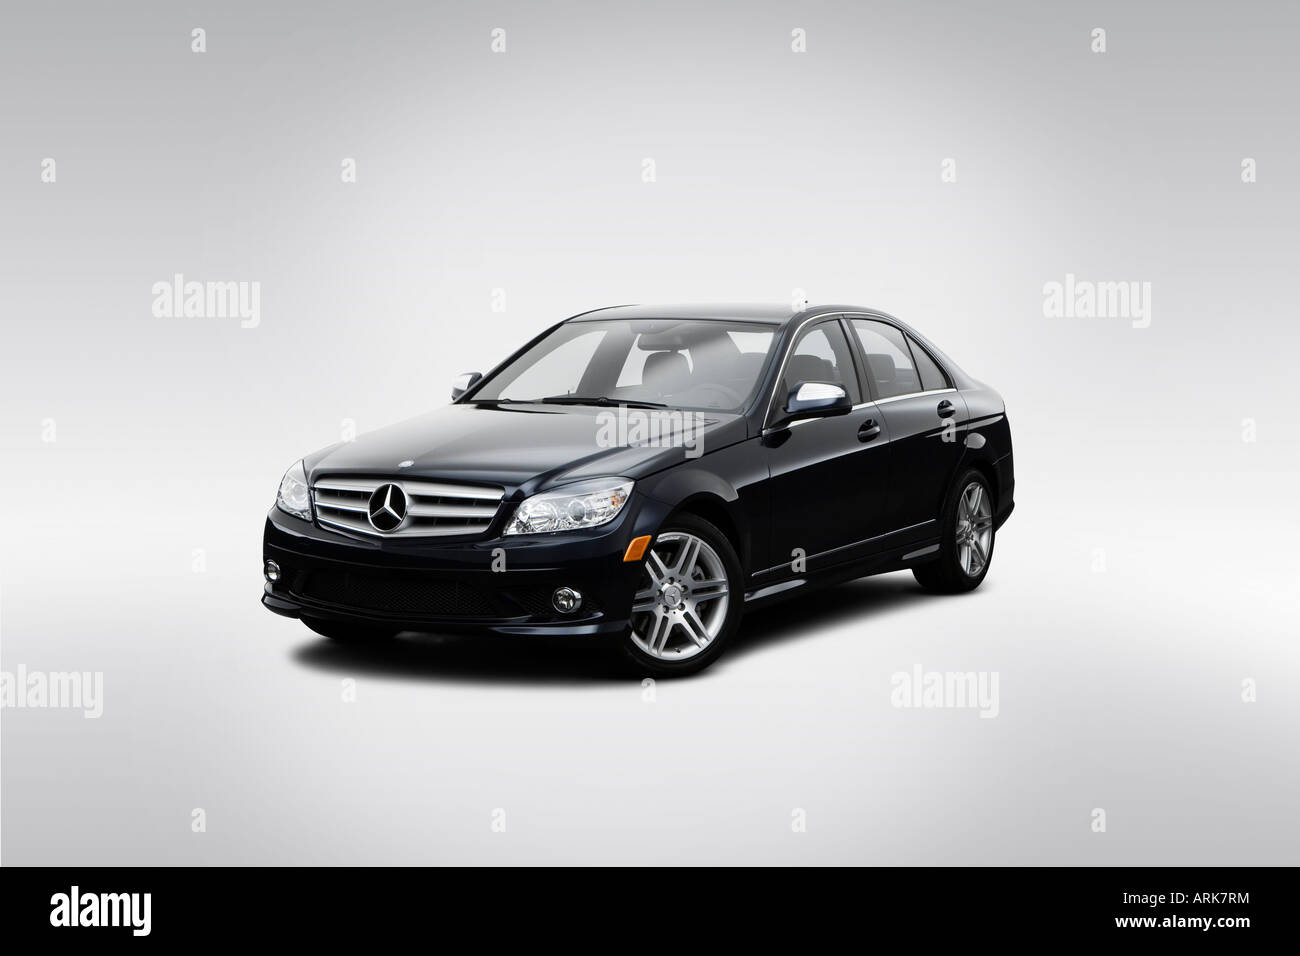 2008 mercedes benz c350 sedan hi-res stock photography and images - Alamy